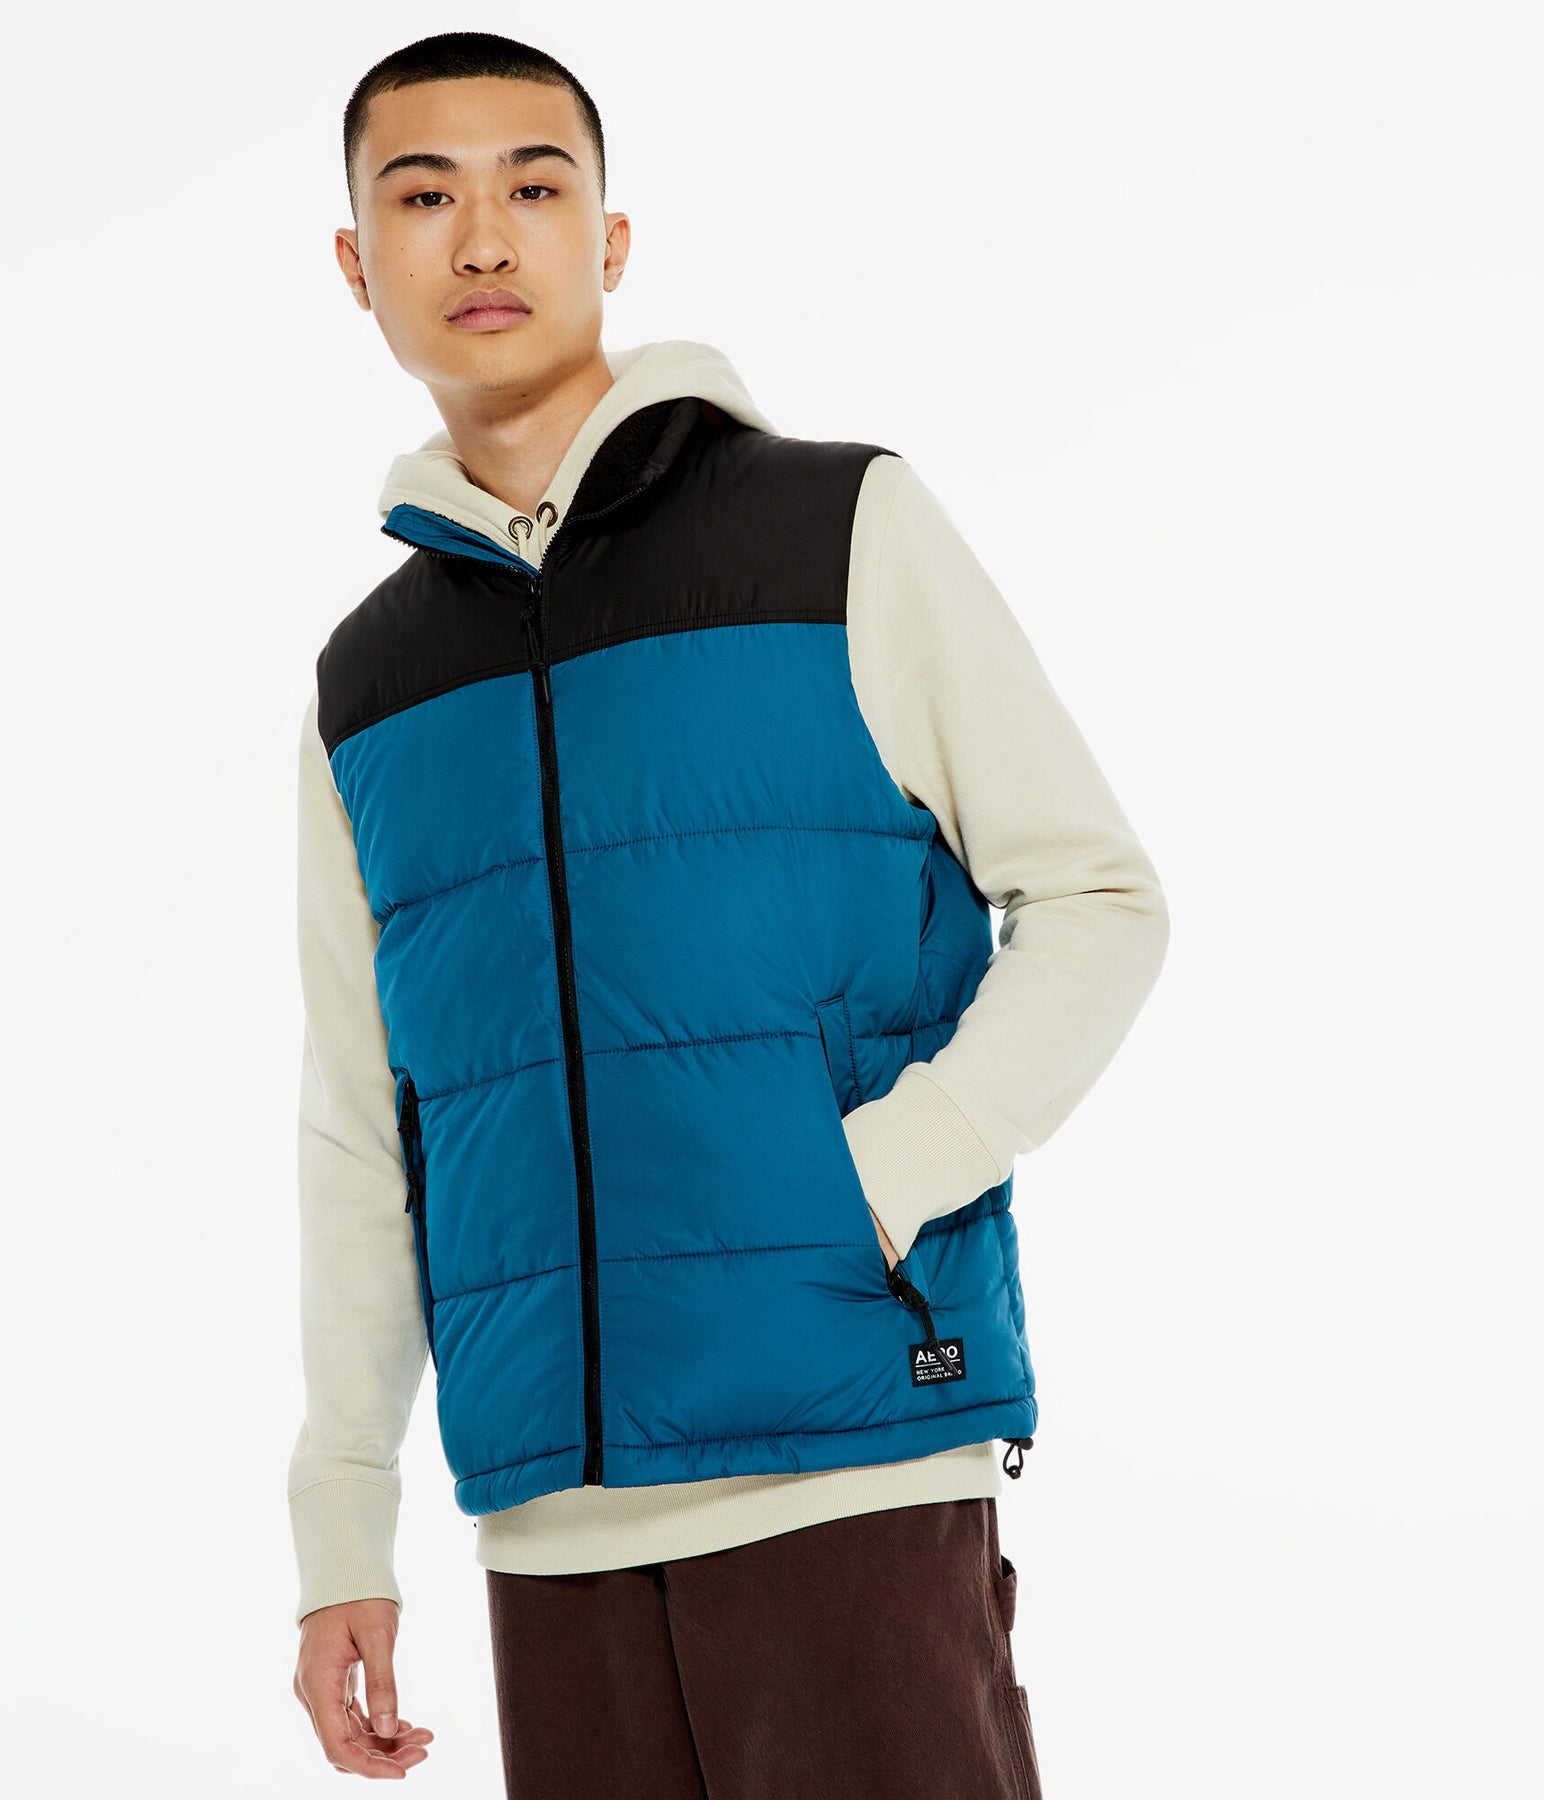 Aeropostale Men's Colorblocked Wide-Channel Quilted Puffer Vest (Teal or Bleach) $15 + Free Shipping